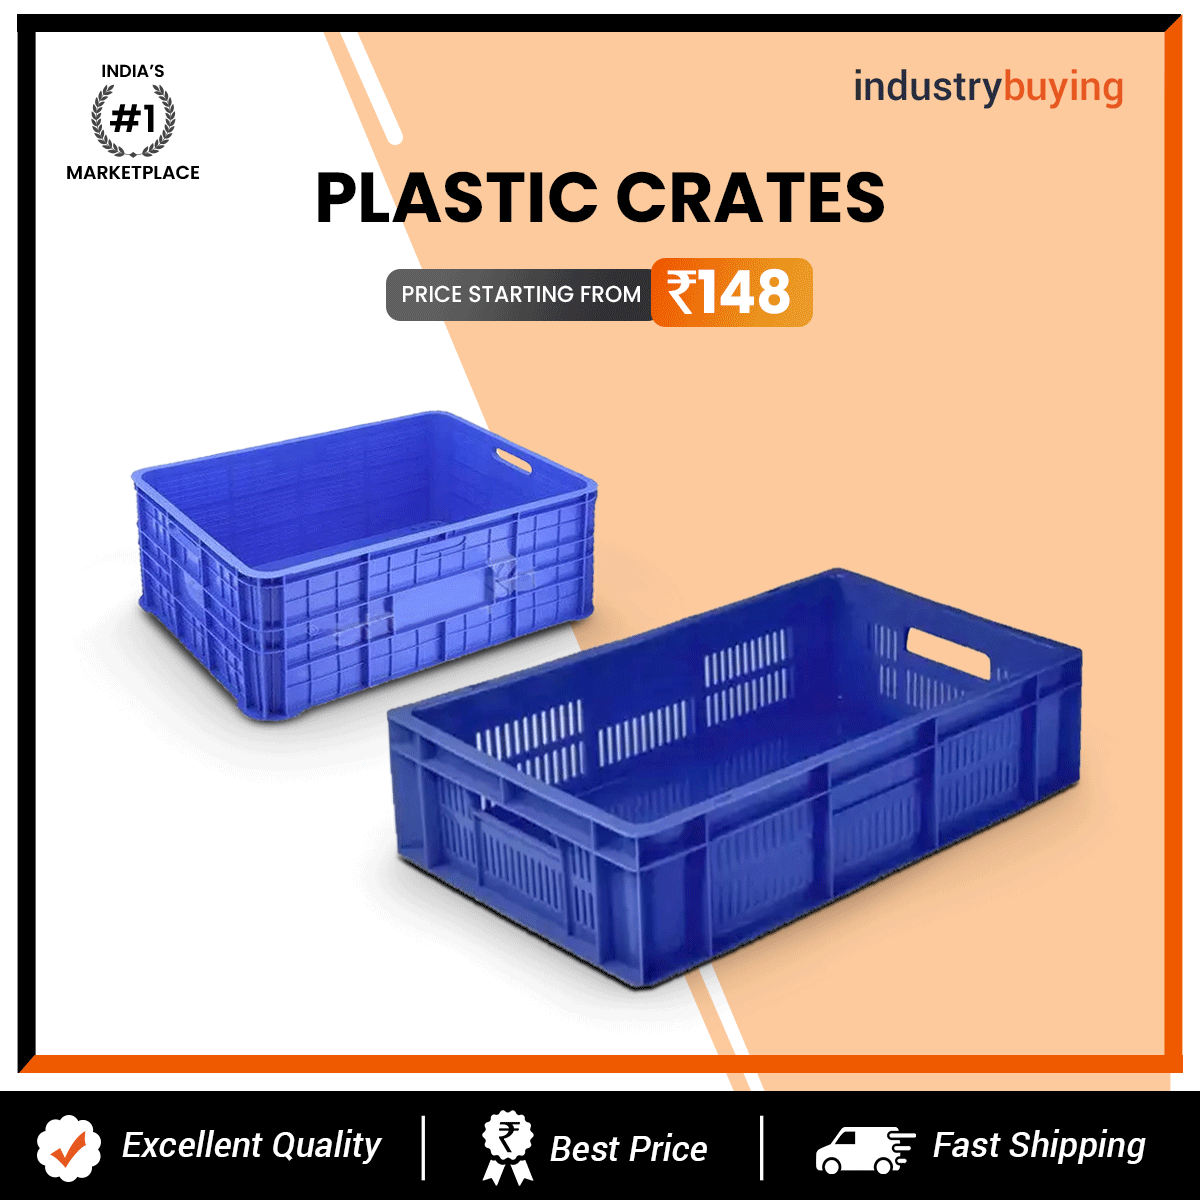 Different Types of Plastic Crates available in the market? | by Punit Kumar  | Medium